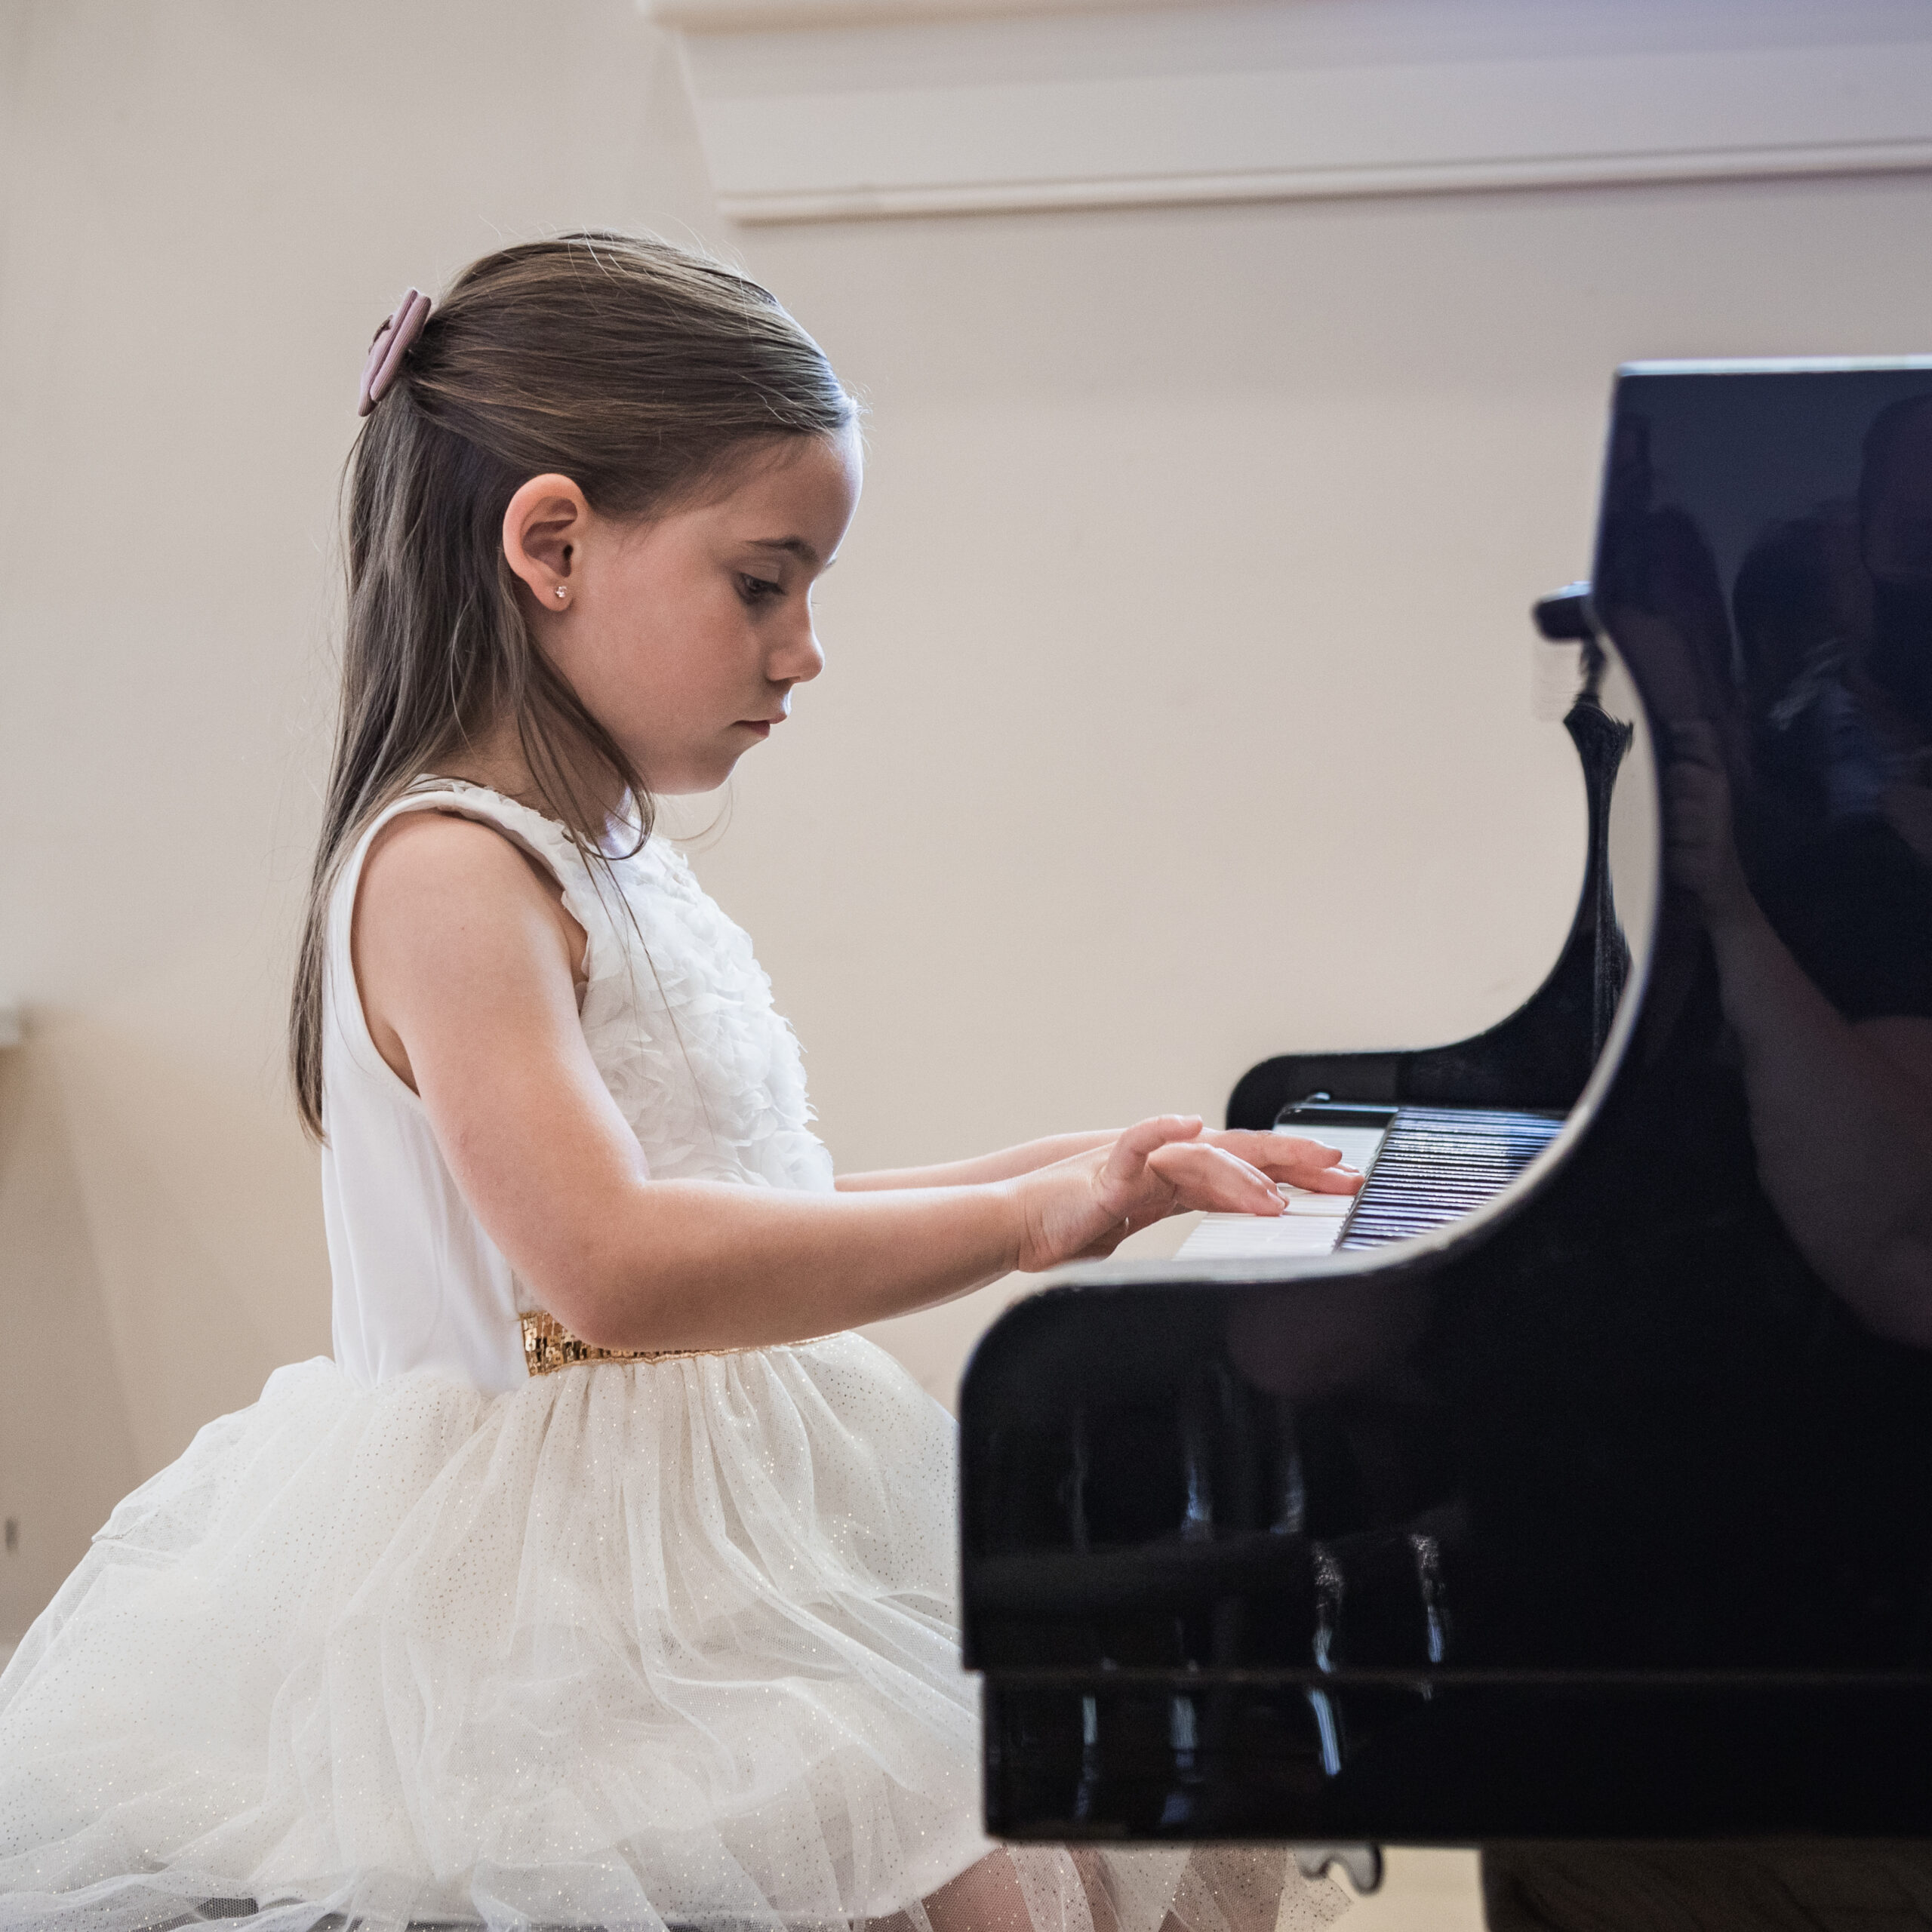 Young girl playing piano in white dress